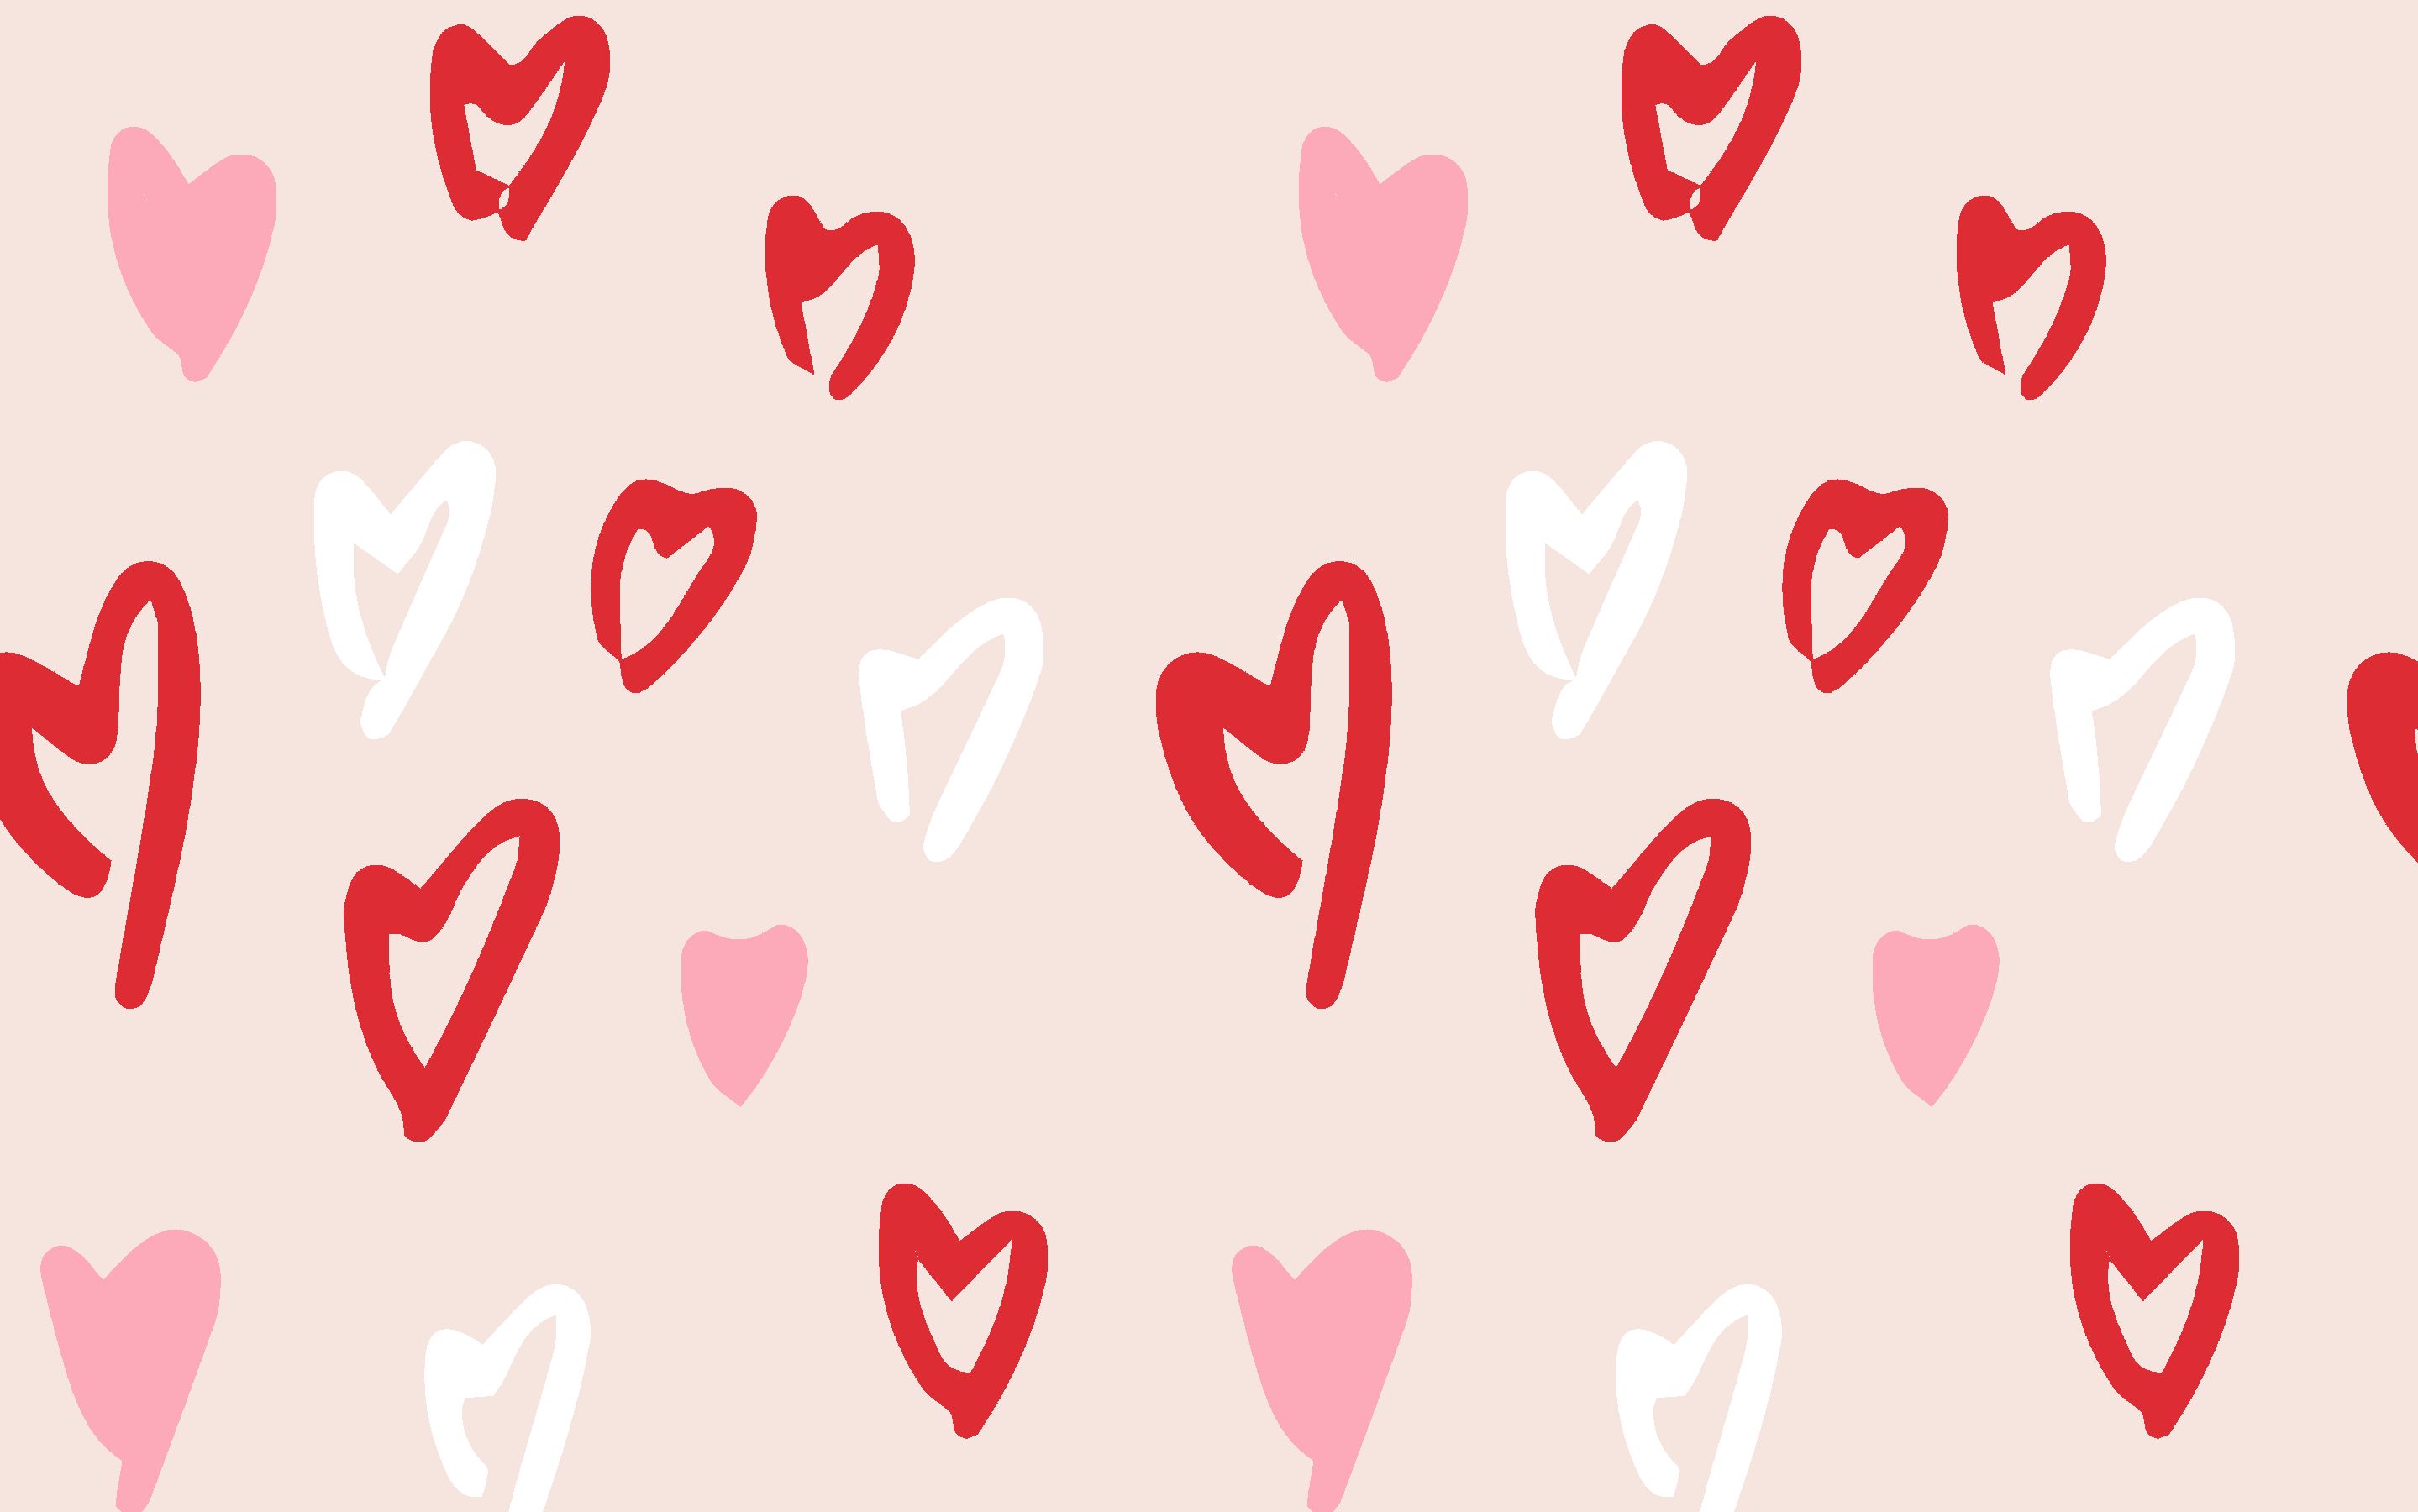 Free valentine's day heart wallpaper for your desktop or phone. Valentines wallpaper, Valentines day background, Heart wallpaper